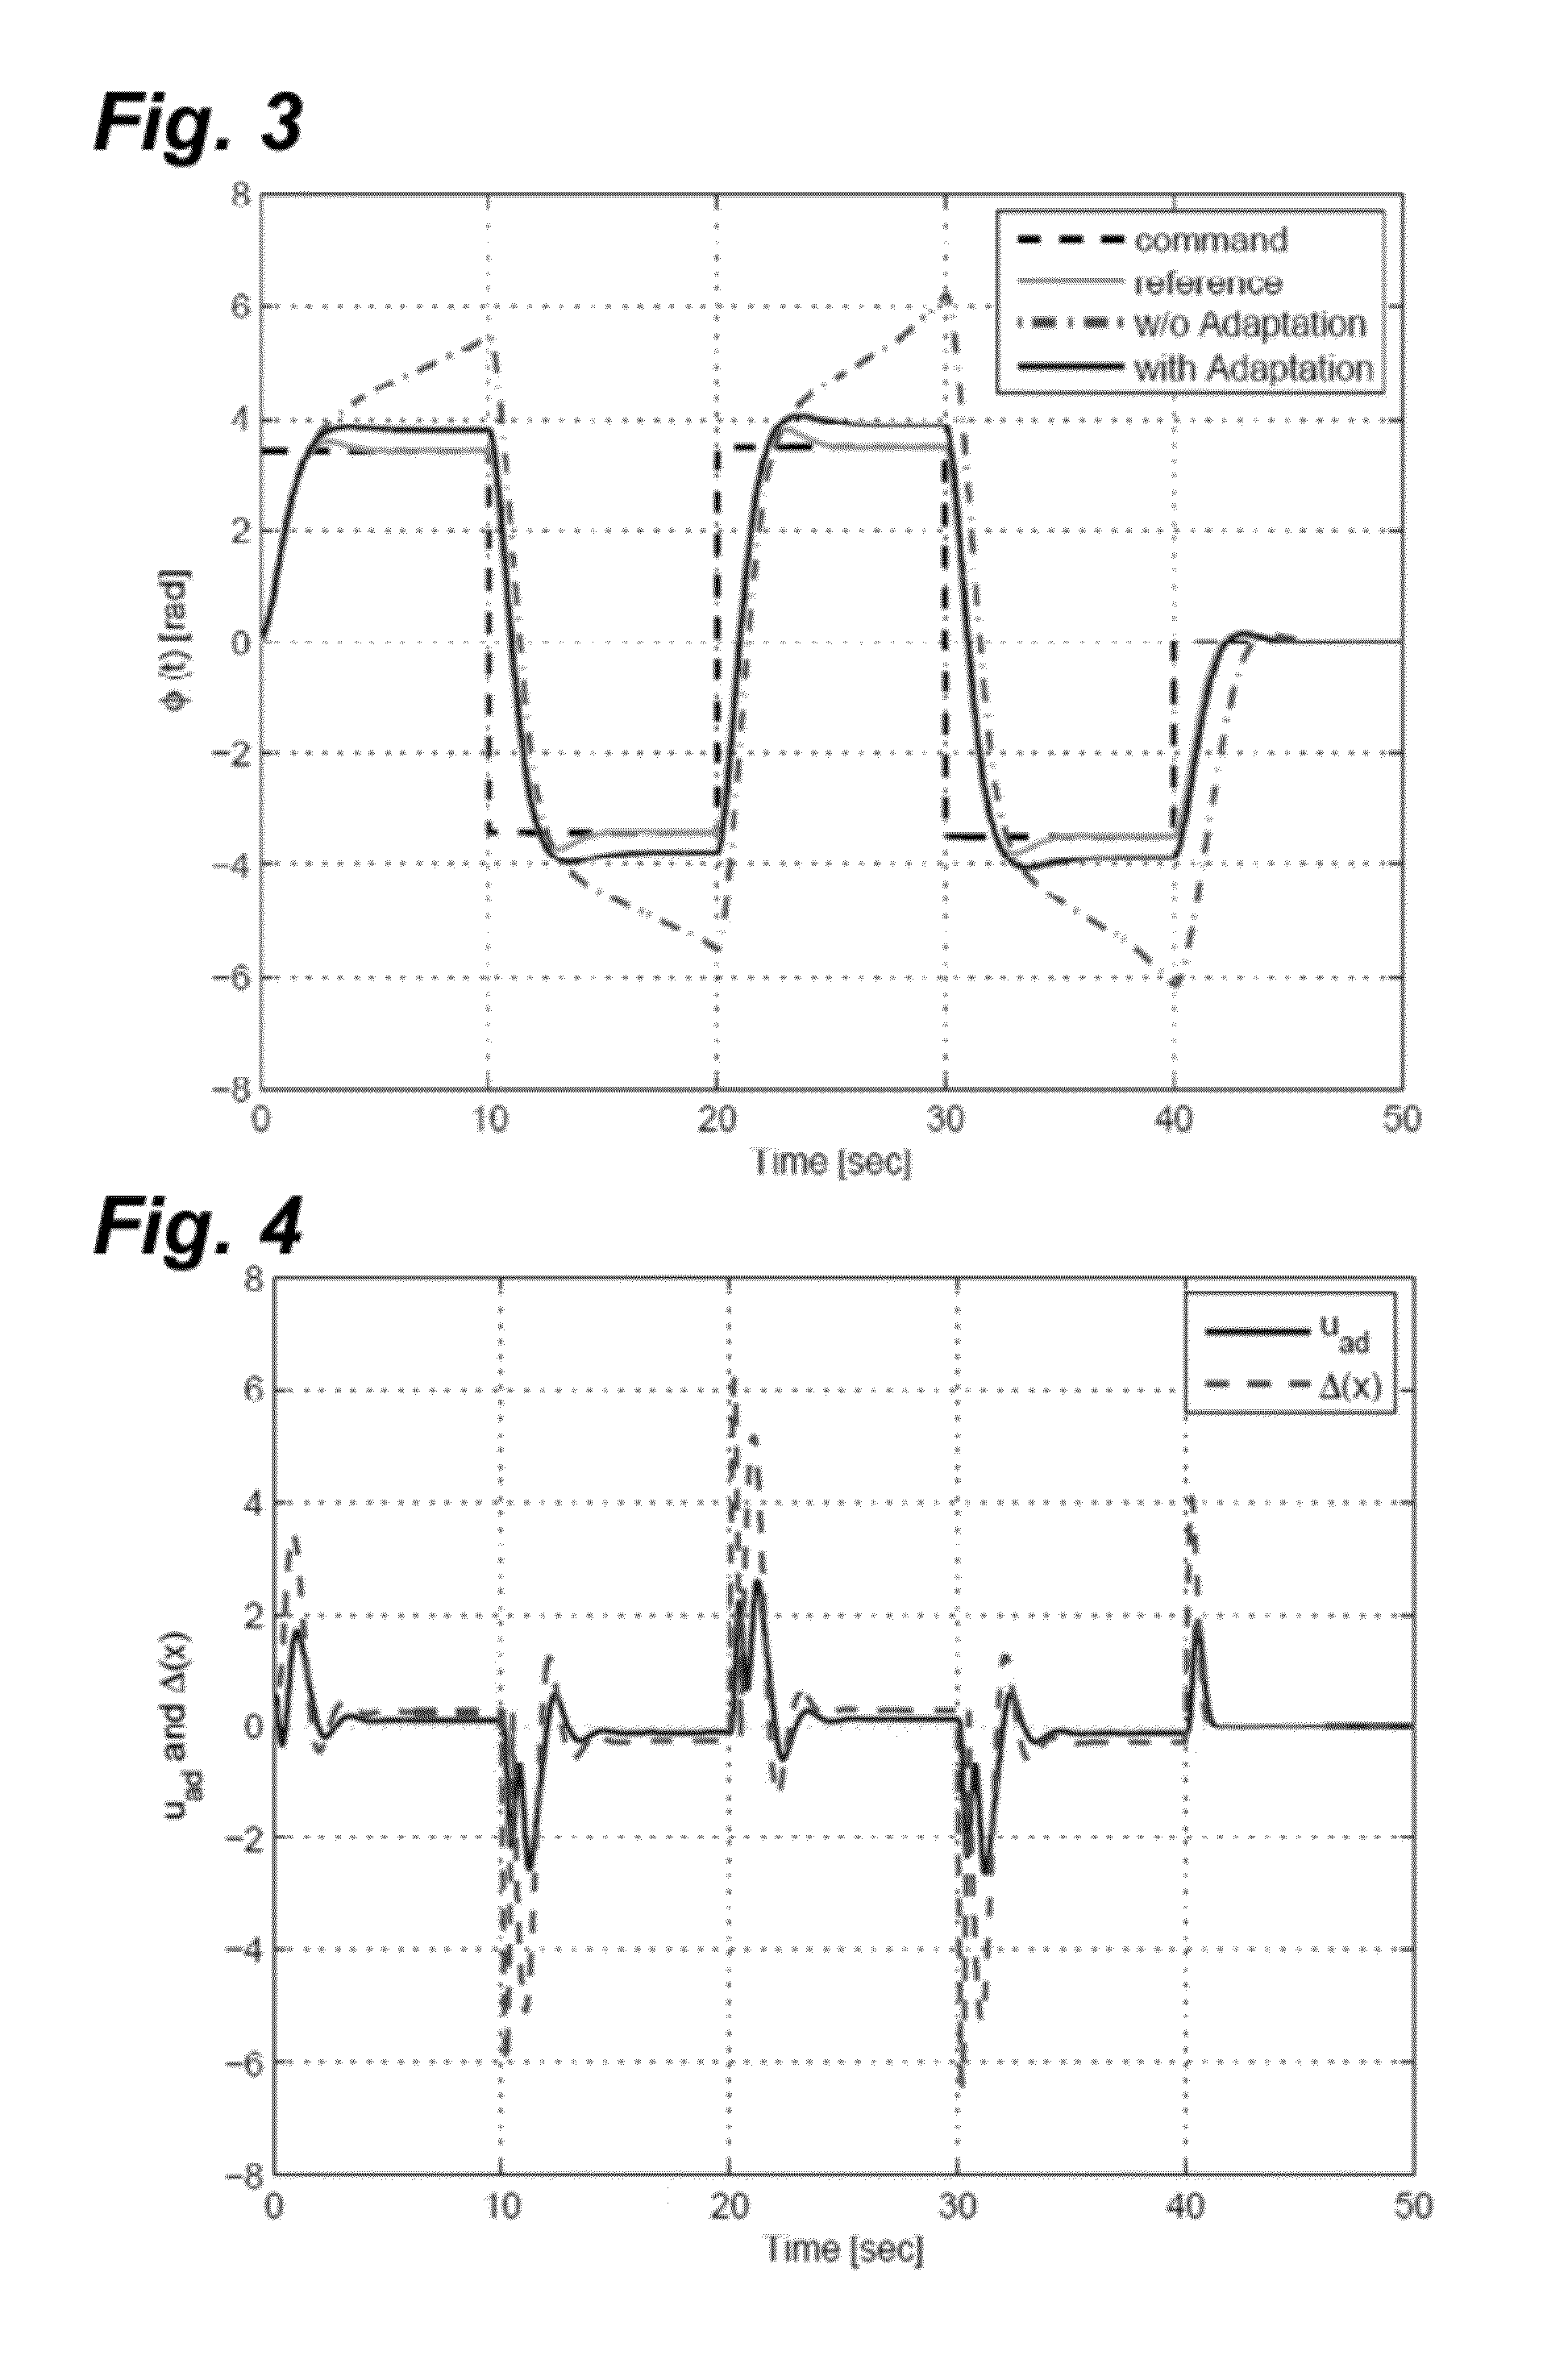 Systems and methods for parameter dependent riccati equation approaches to adaptive control